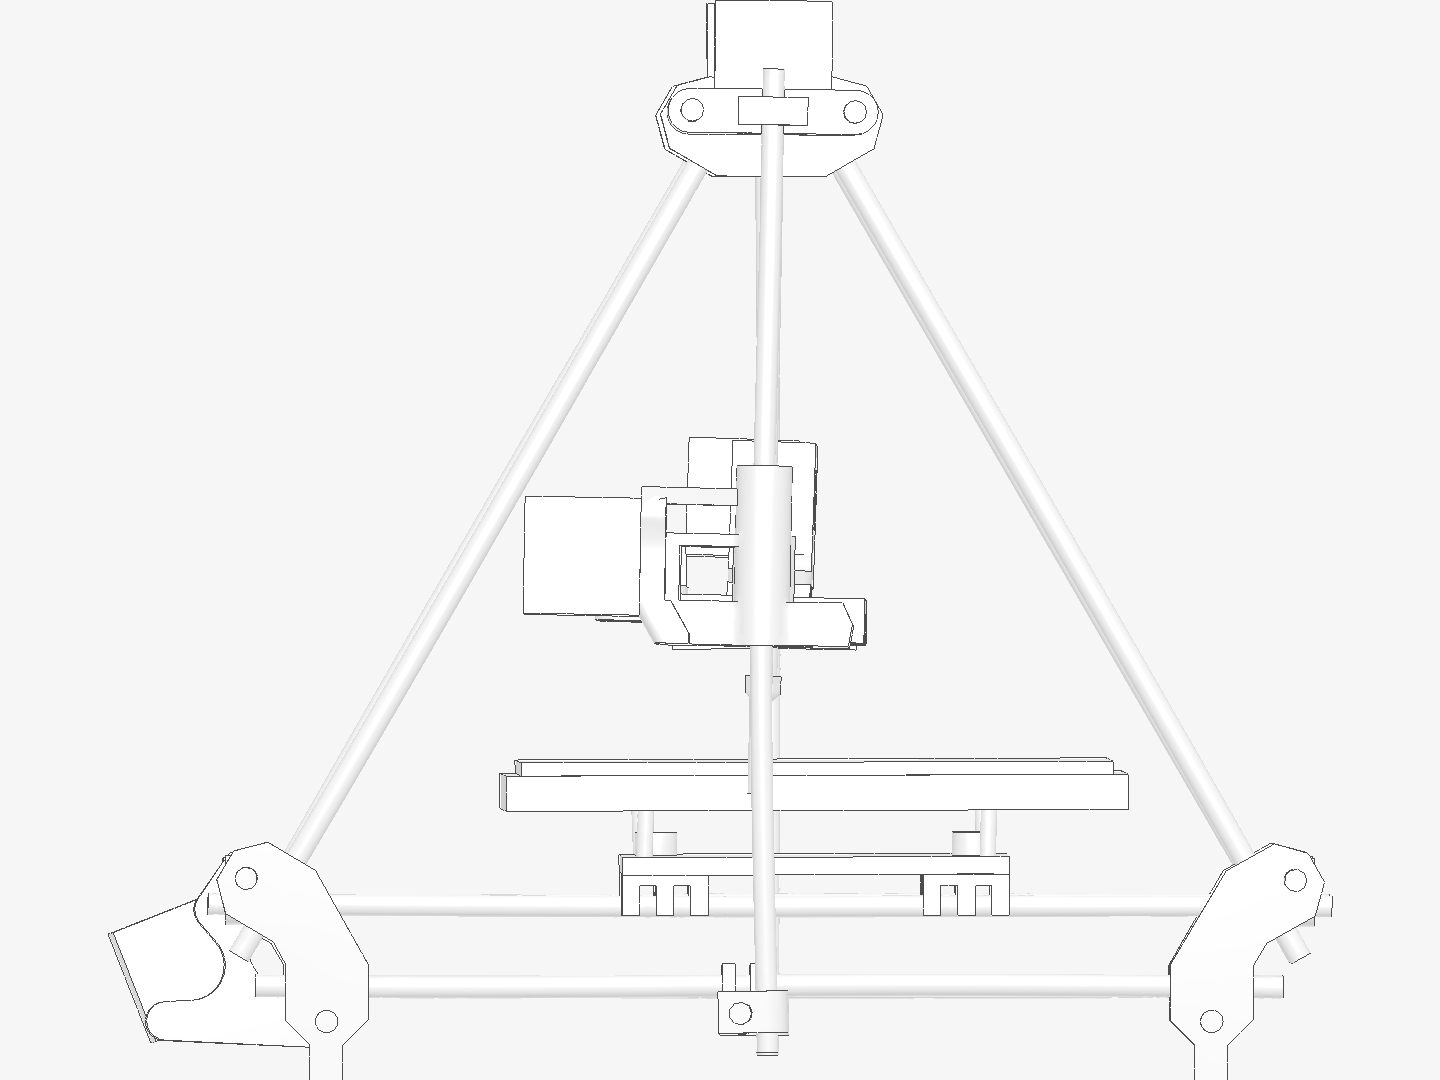 partitioned CAD model-3D printer assembly - Copy image